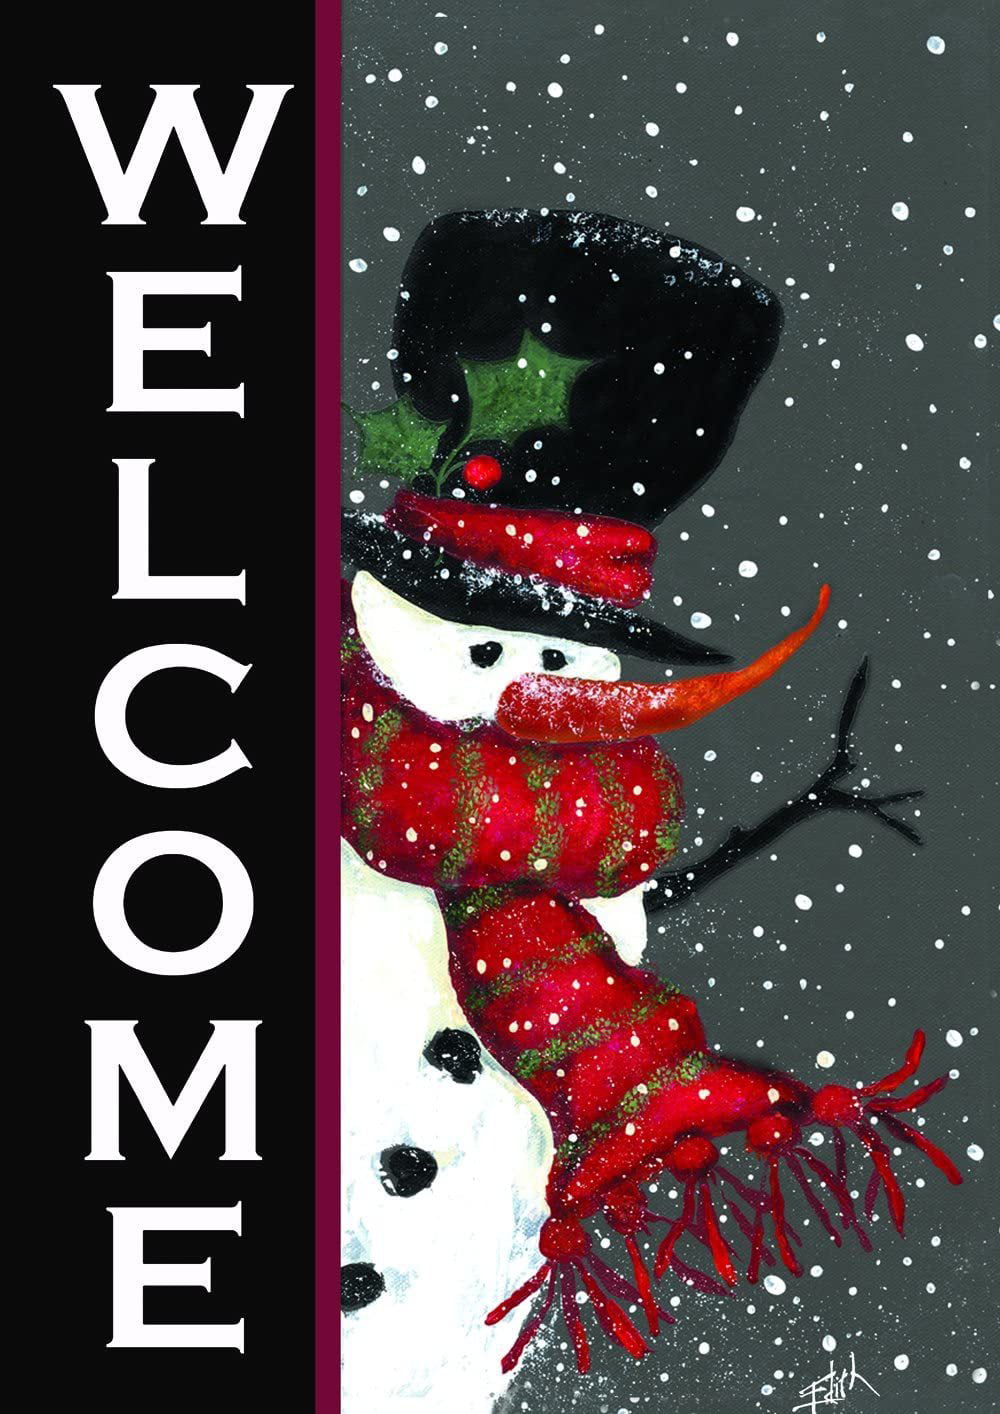 Dolls House Poster Picture The Snowman Canvas 1:12